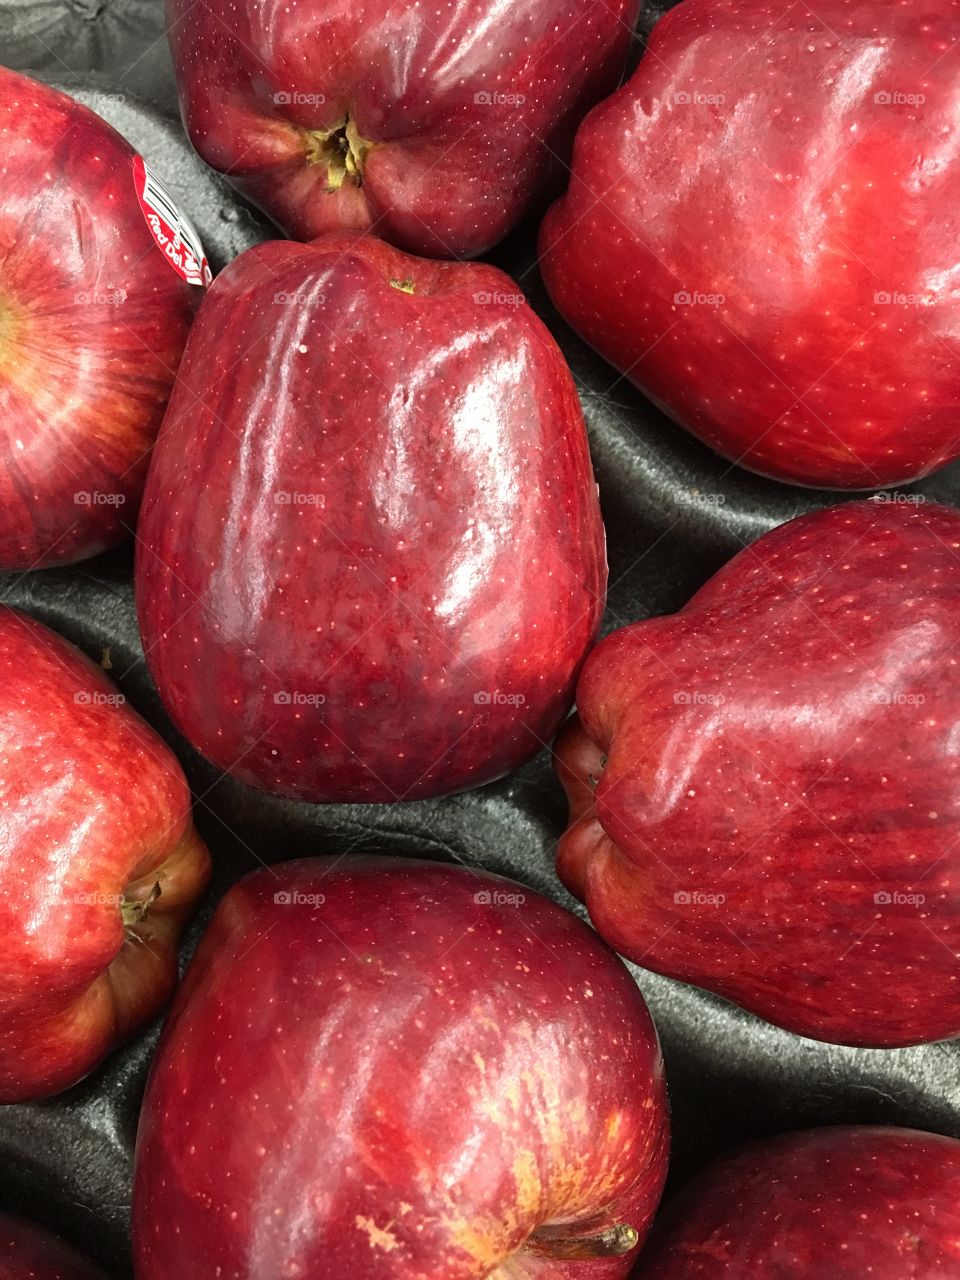 Red delicious apples 